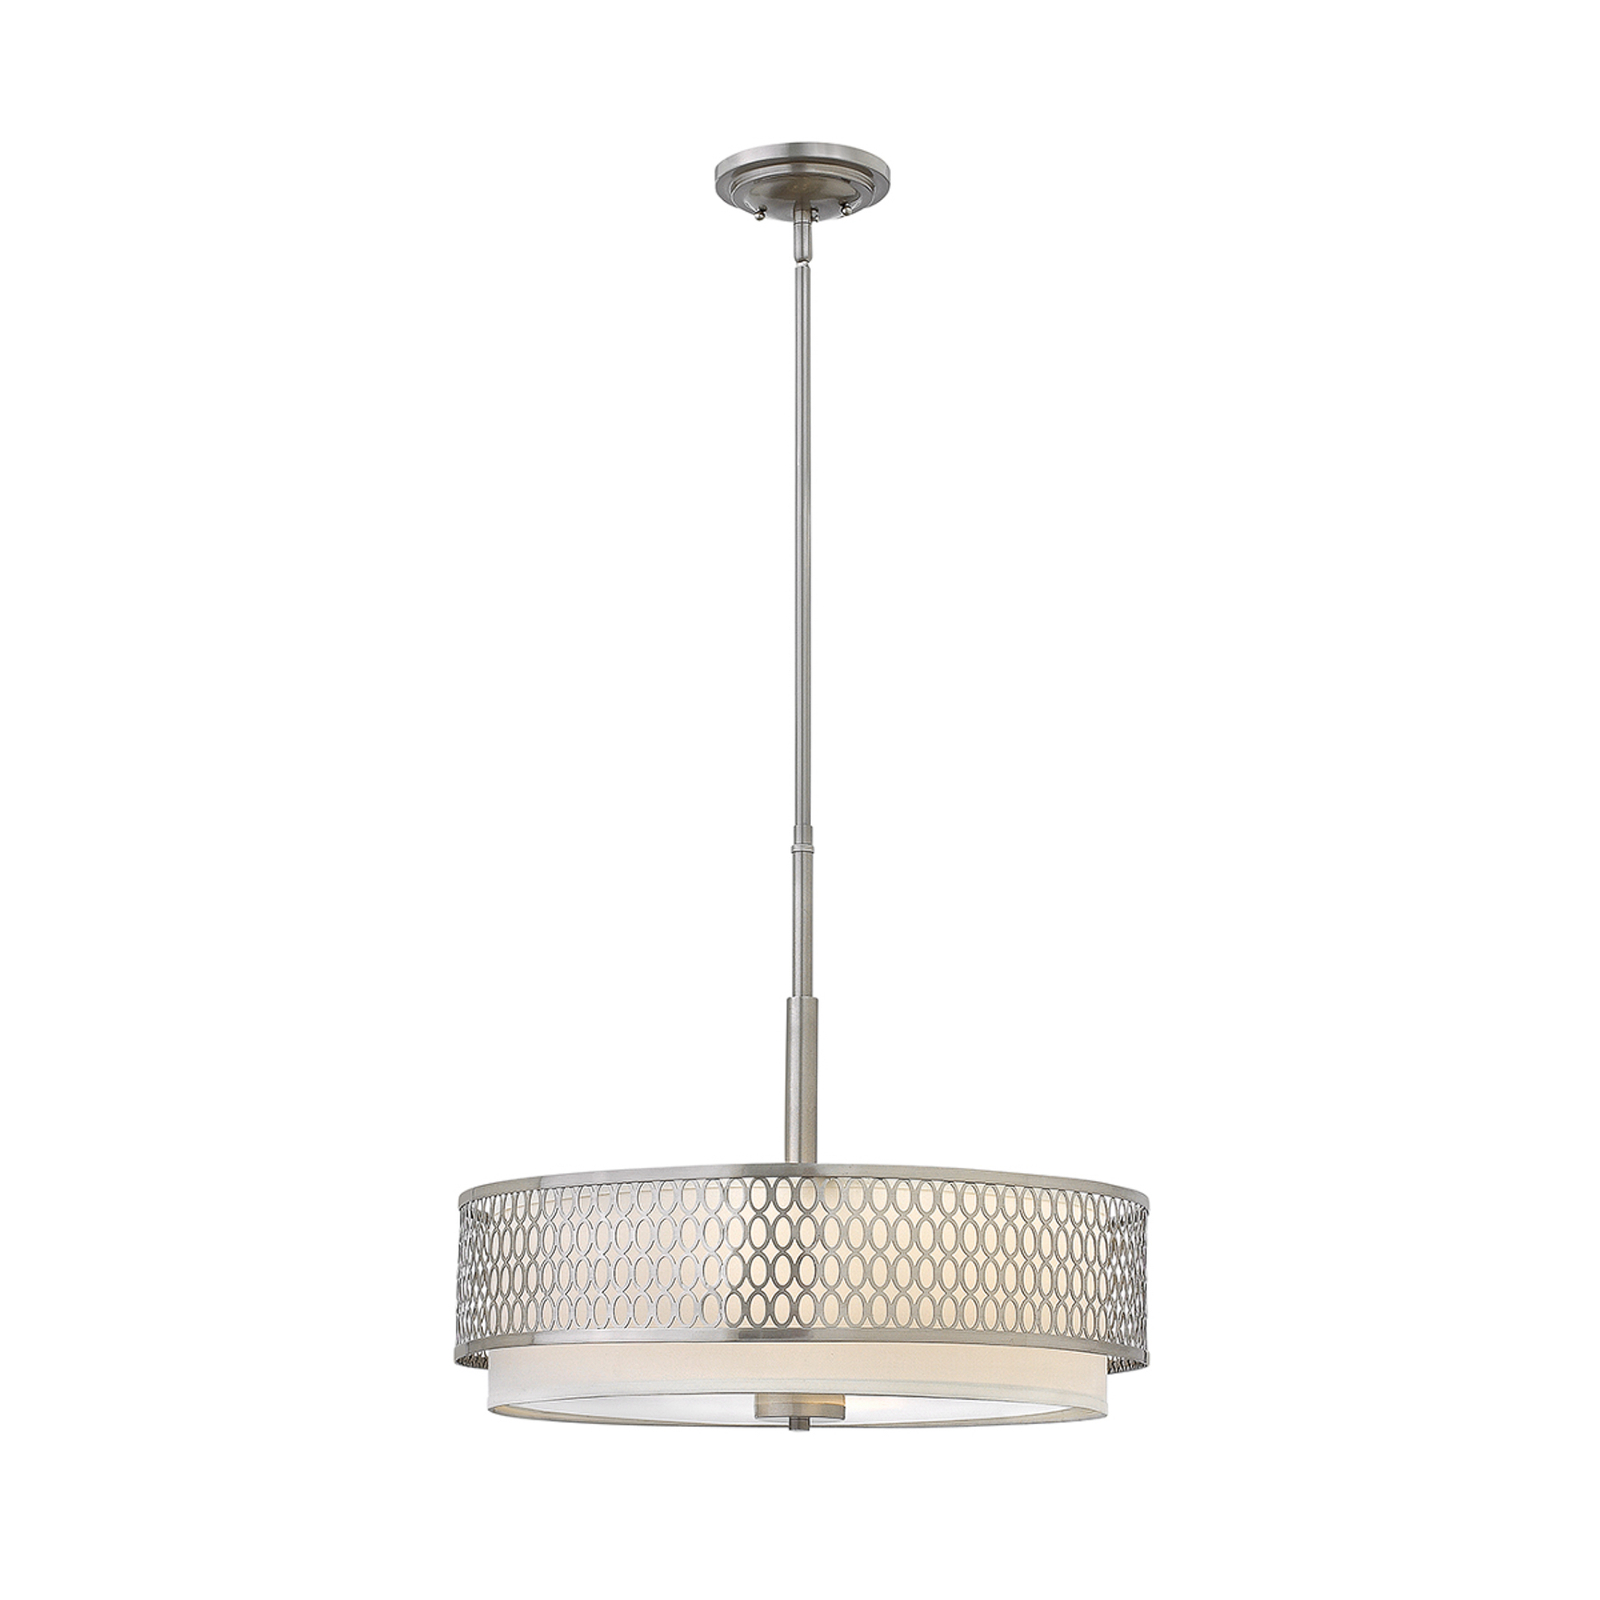 Jules pendant light, linen and glass lampshade